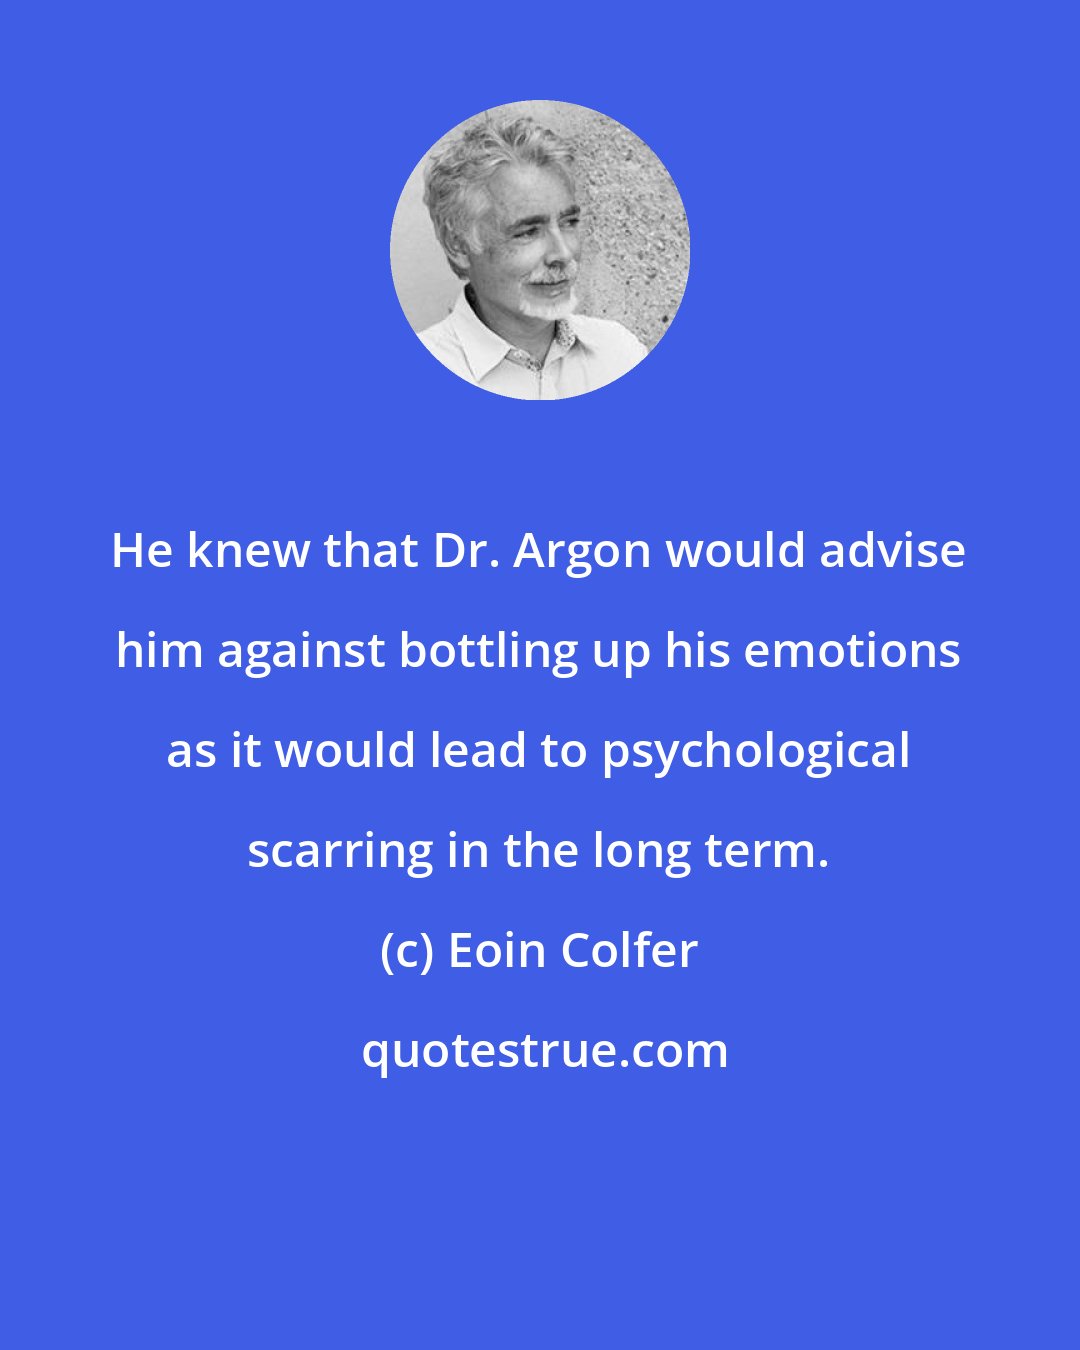 Eoin Colfer: He knew that Dr. Argon would advise him against bottling up his emotions as it would lead to psychological scarring in the long term.